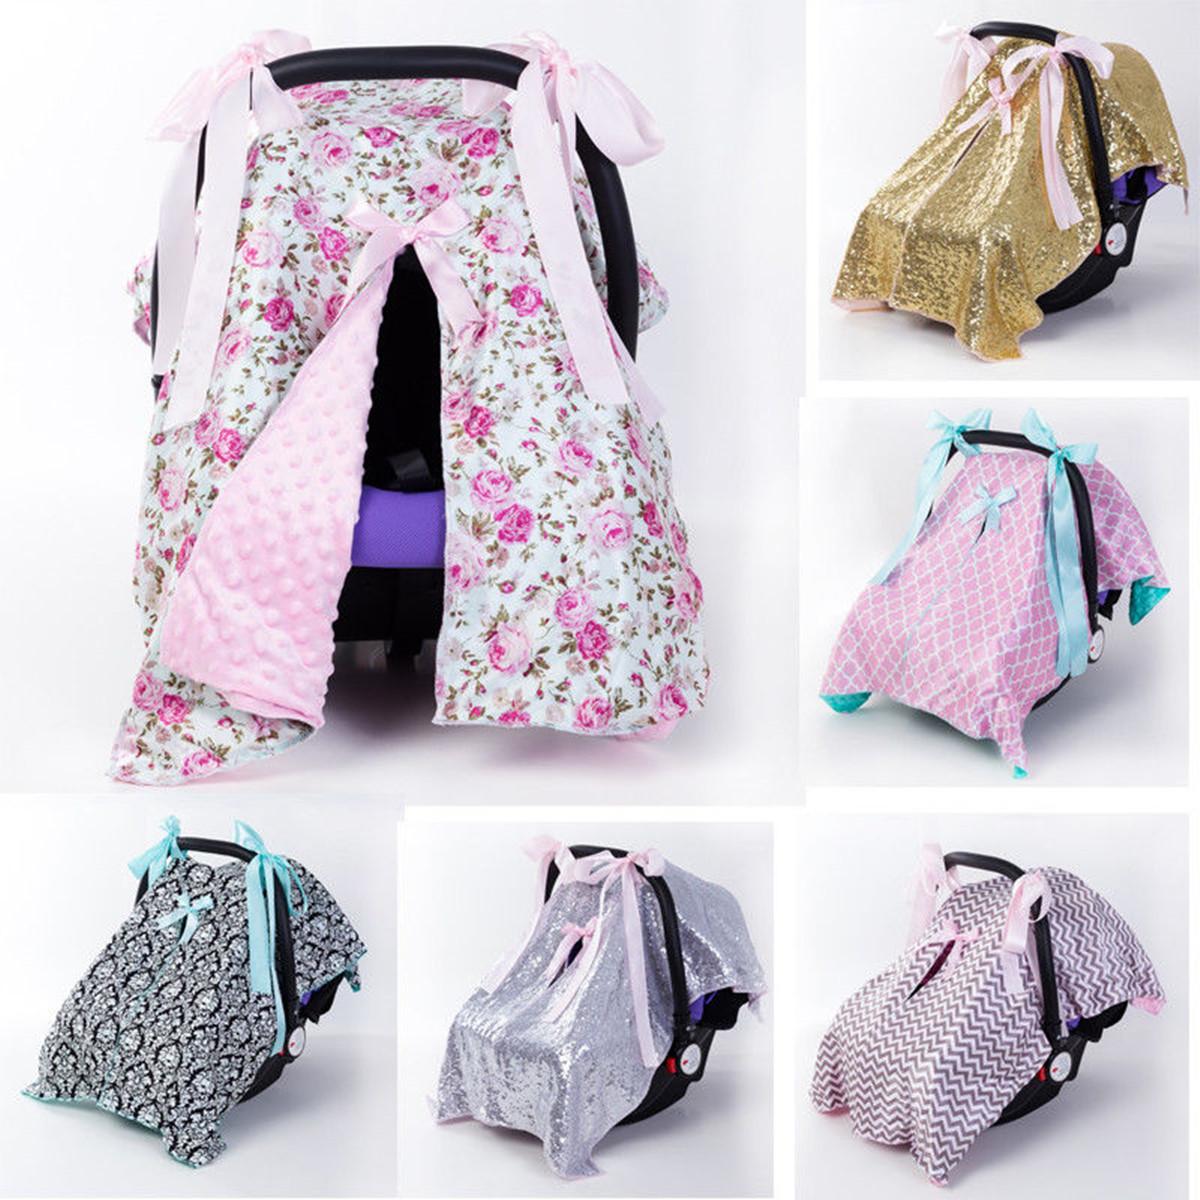 NEW Baby Car Seat Blanket Cover Fashion Bow Newborn Baby Girls Soft Safety Car Seat Canopy Nursing Cover Multi-use Blanket Cover